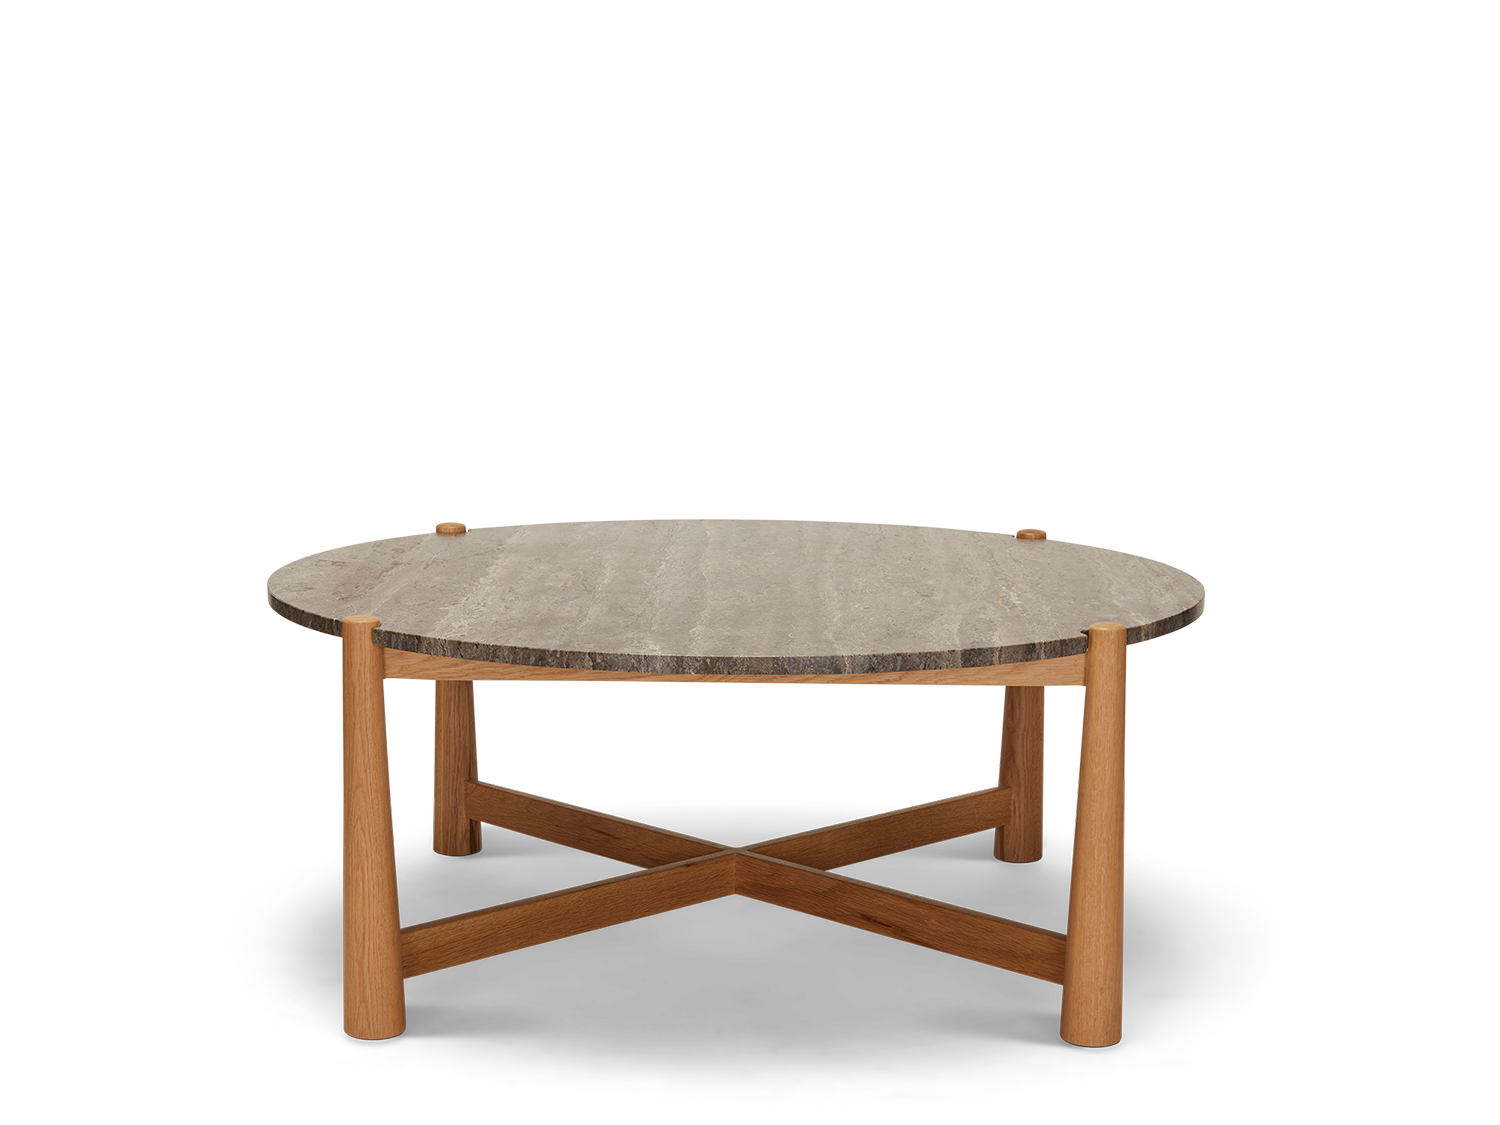 Bronson Coffee Table Round - Contract Grade